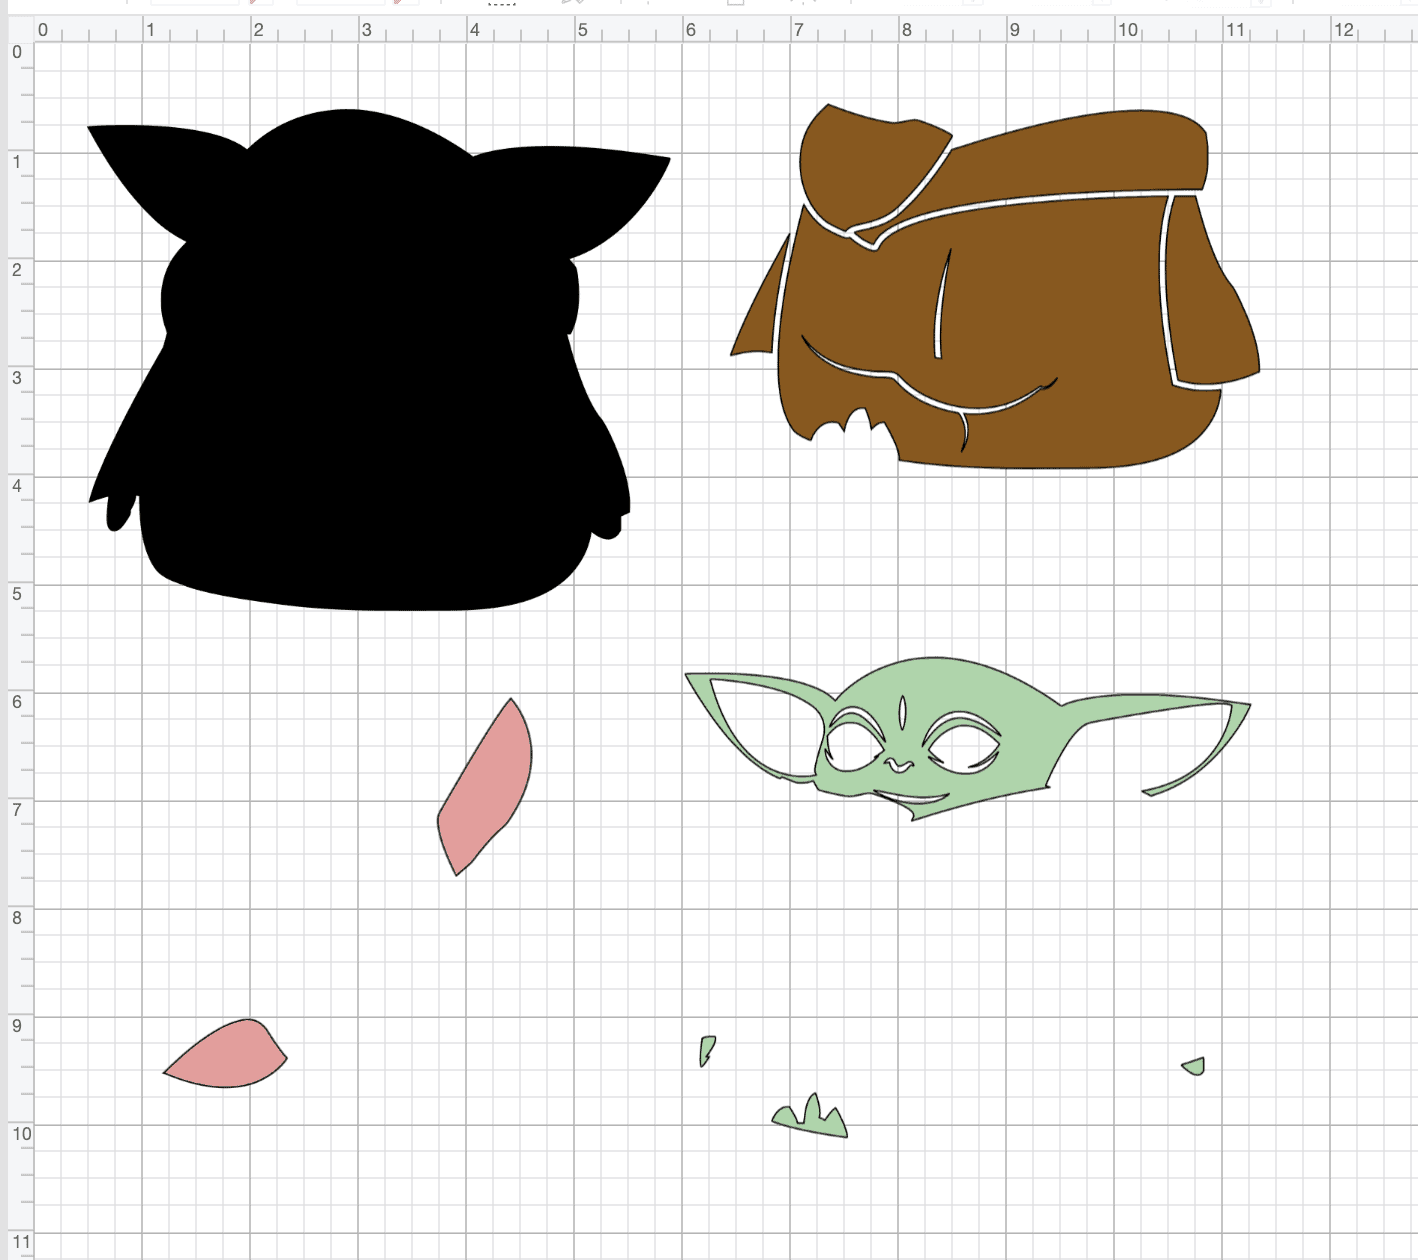 Baby Yoda SVG for Cricut - Create your own Baby Yoda products!